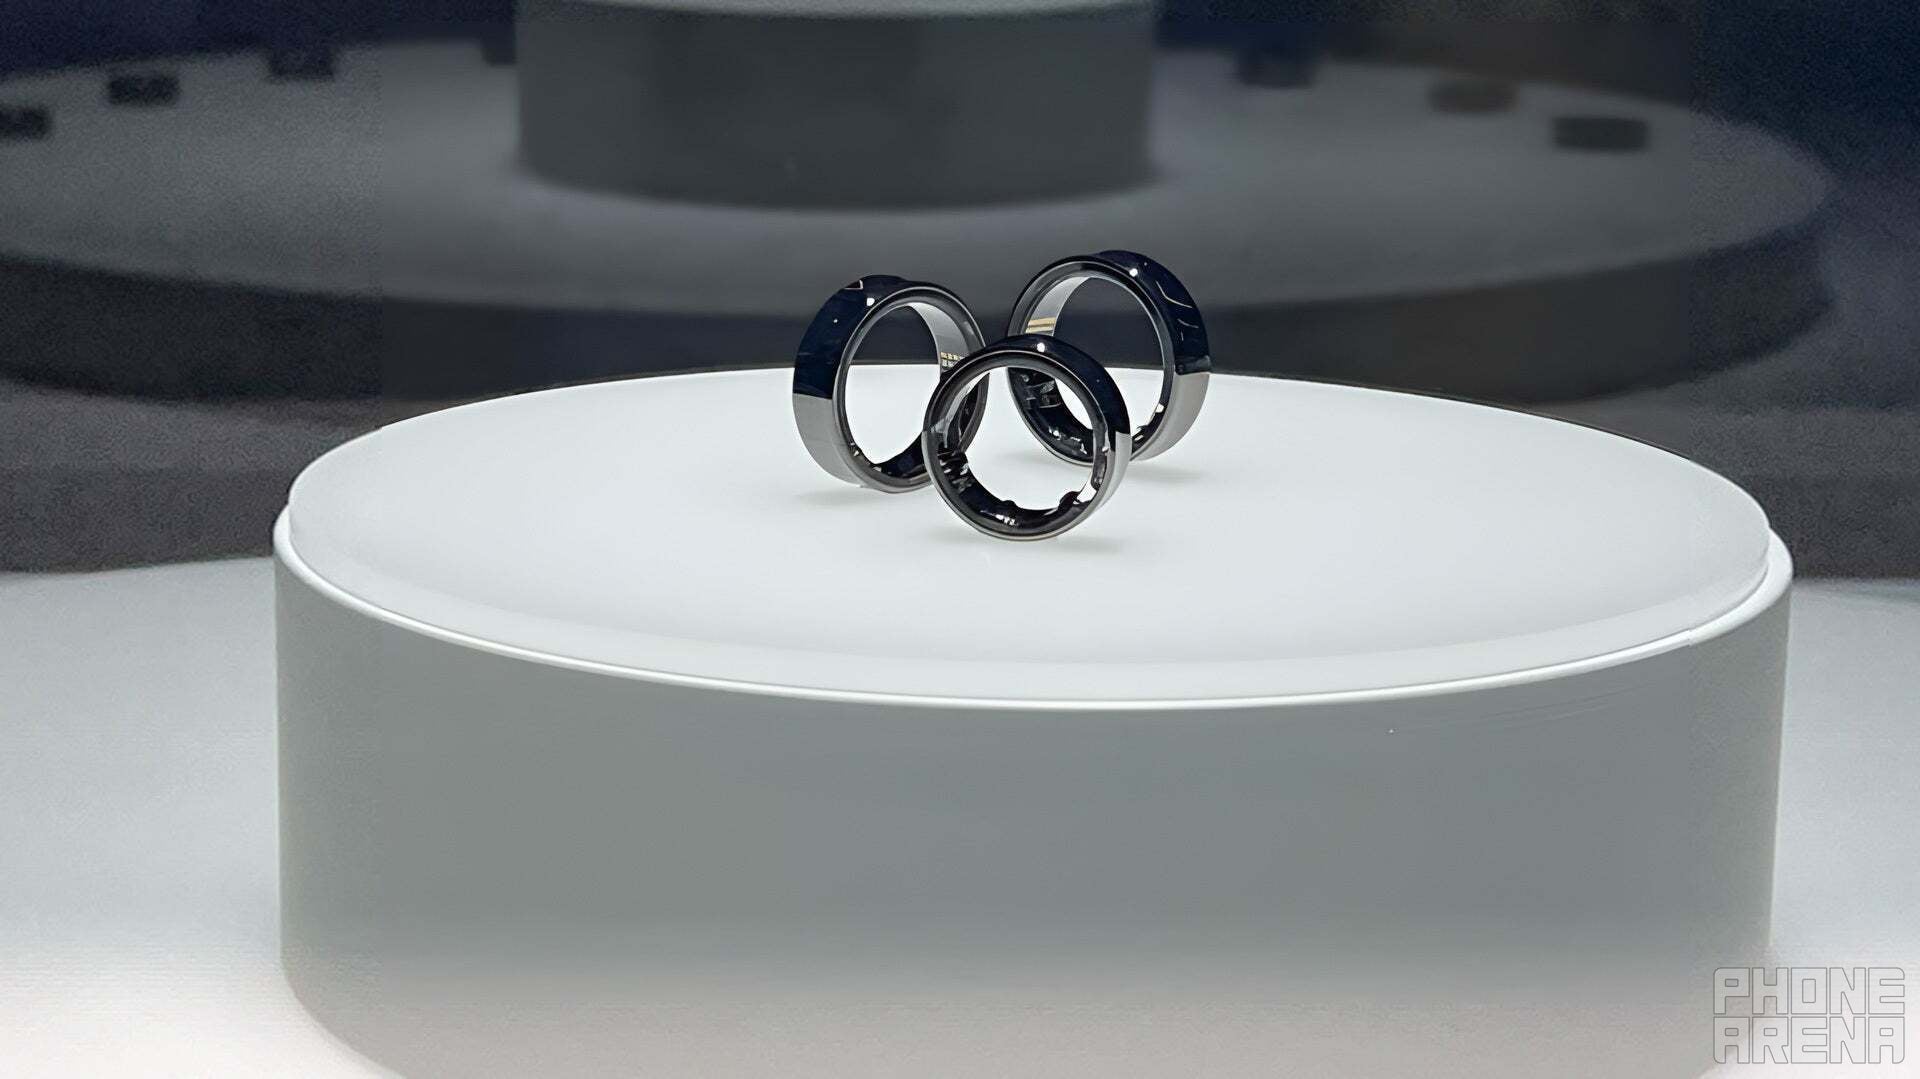 The Galaxy Ring at the MWC in Barcelona (Image Credit–PhoneArena) - The Galaxy Ring: Тhe new must-have gadget or another ecosystem gimmick?